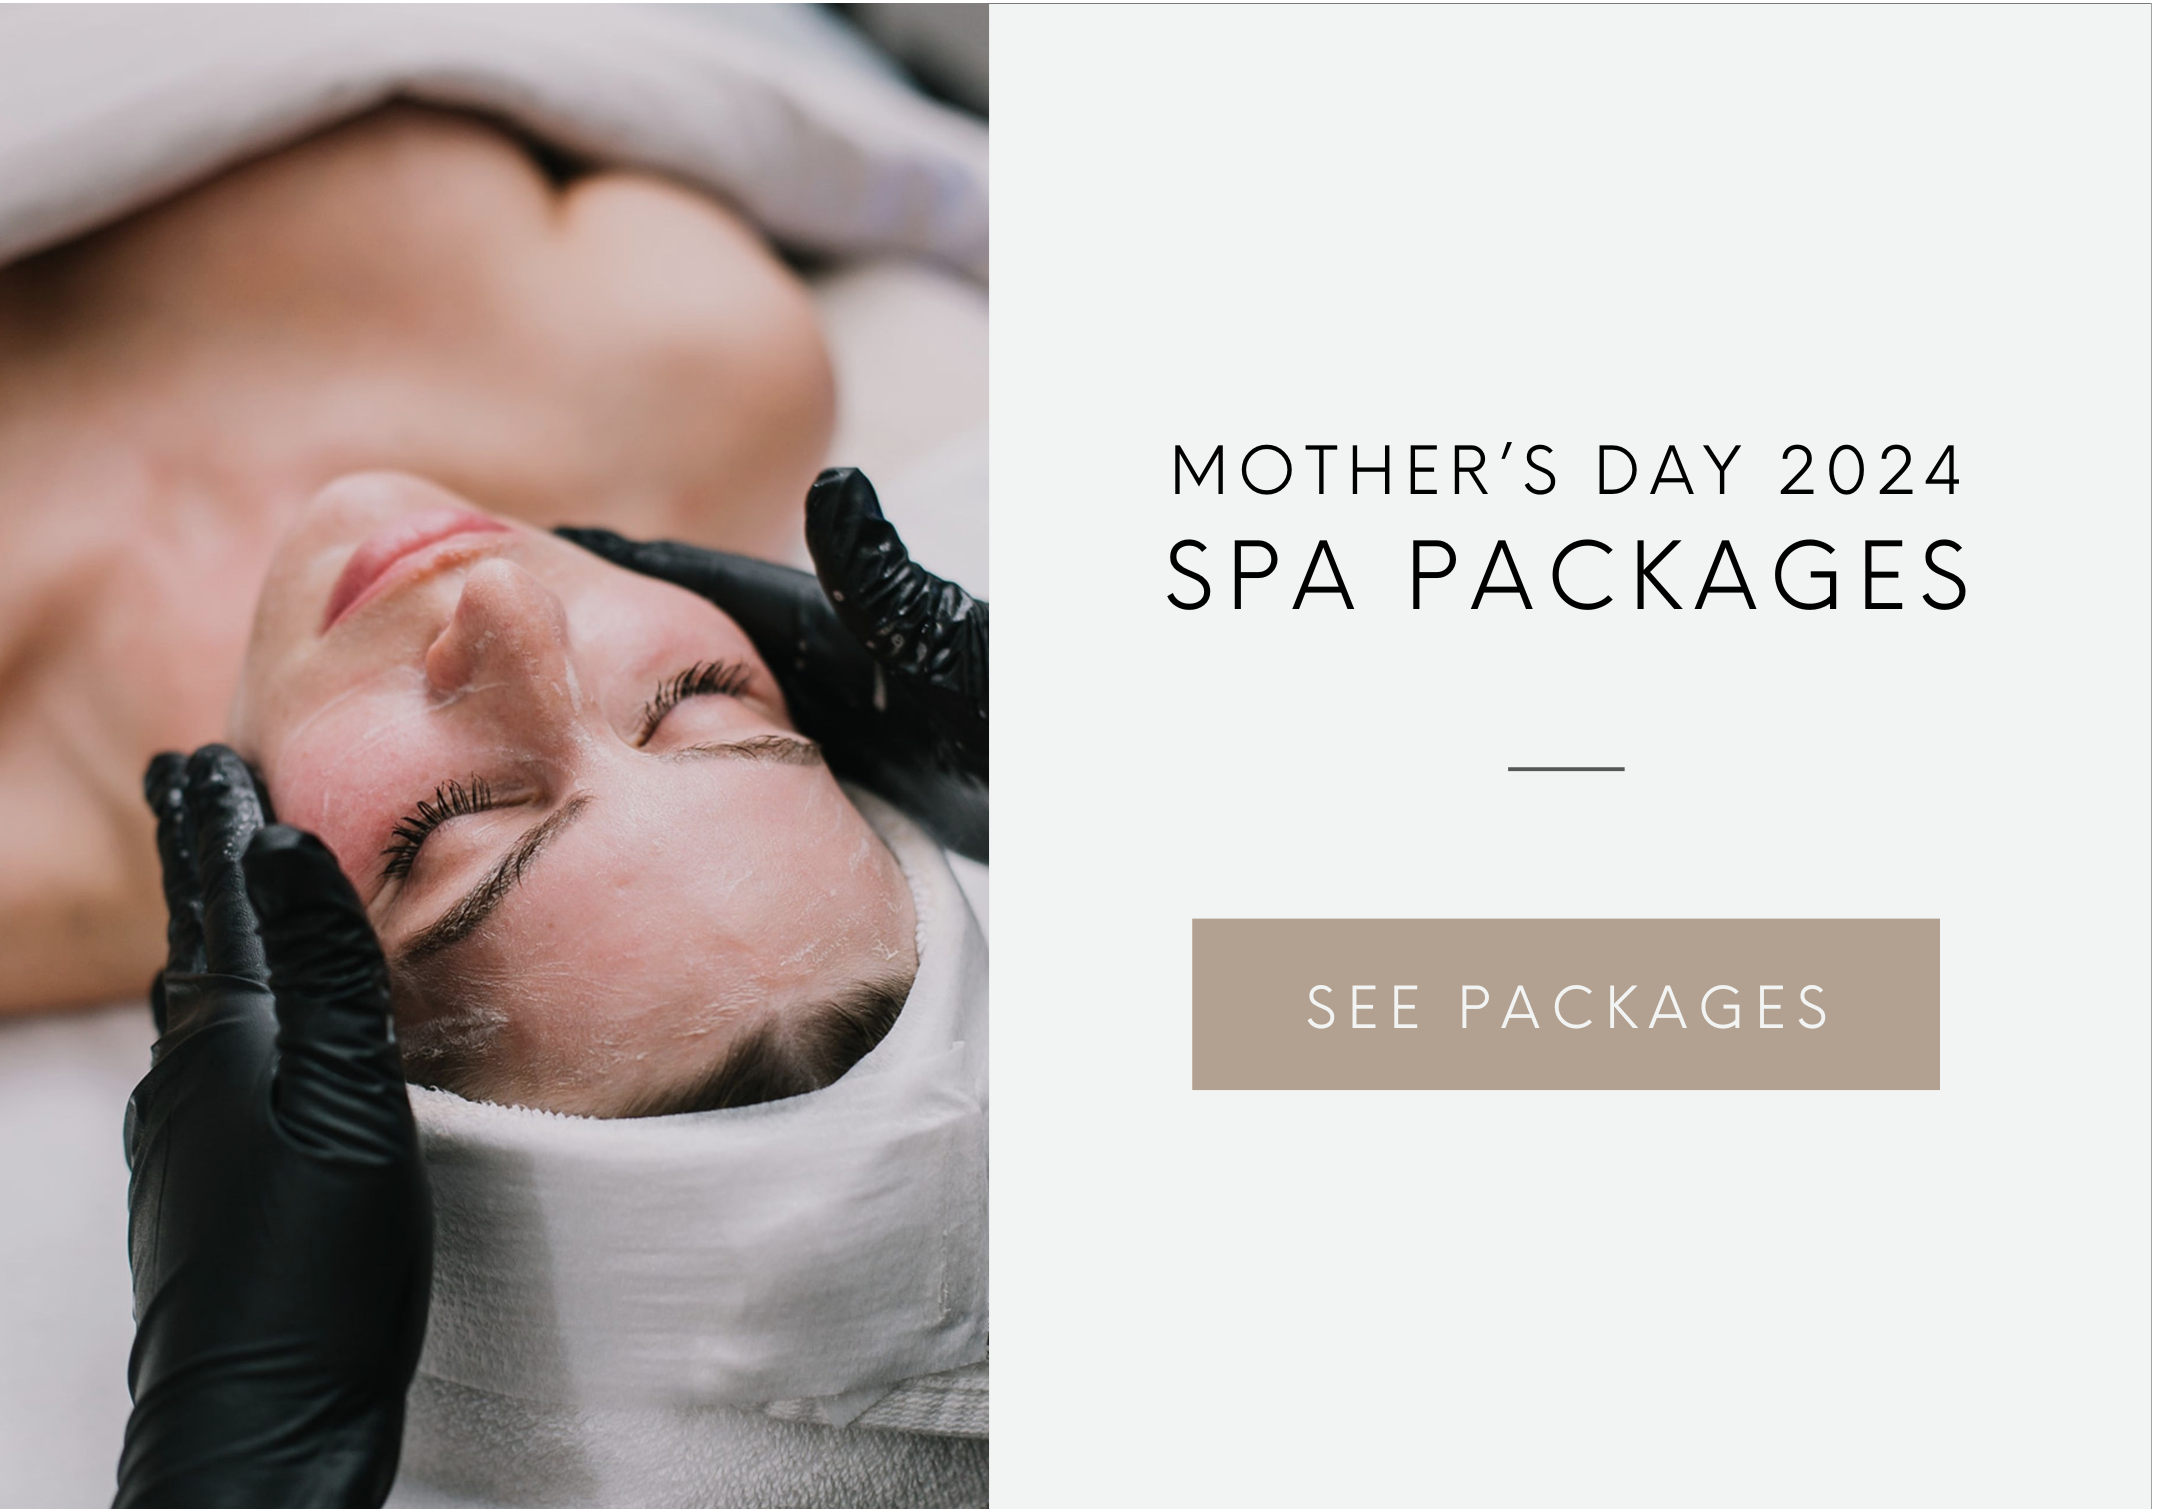 mothers-day-packages-spa-sway-austin-texas crop